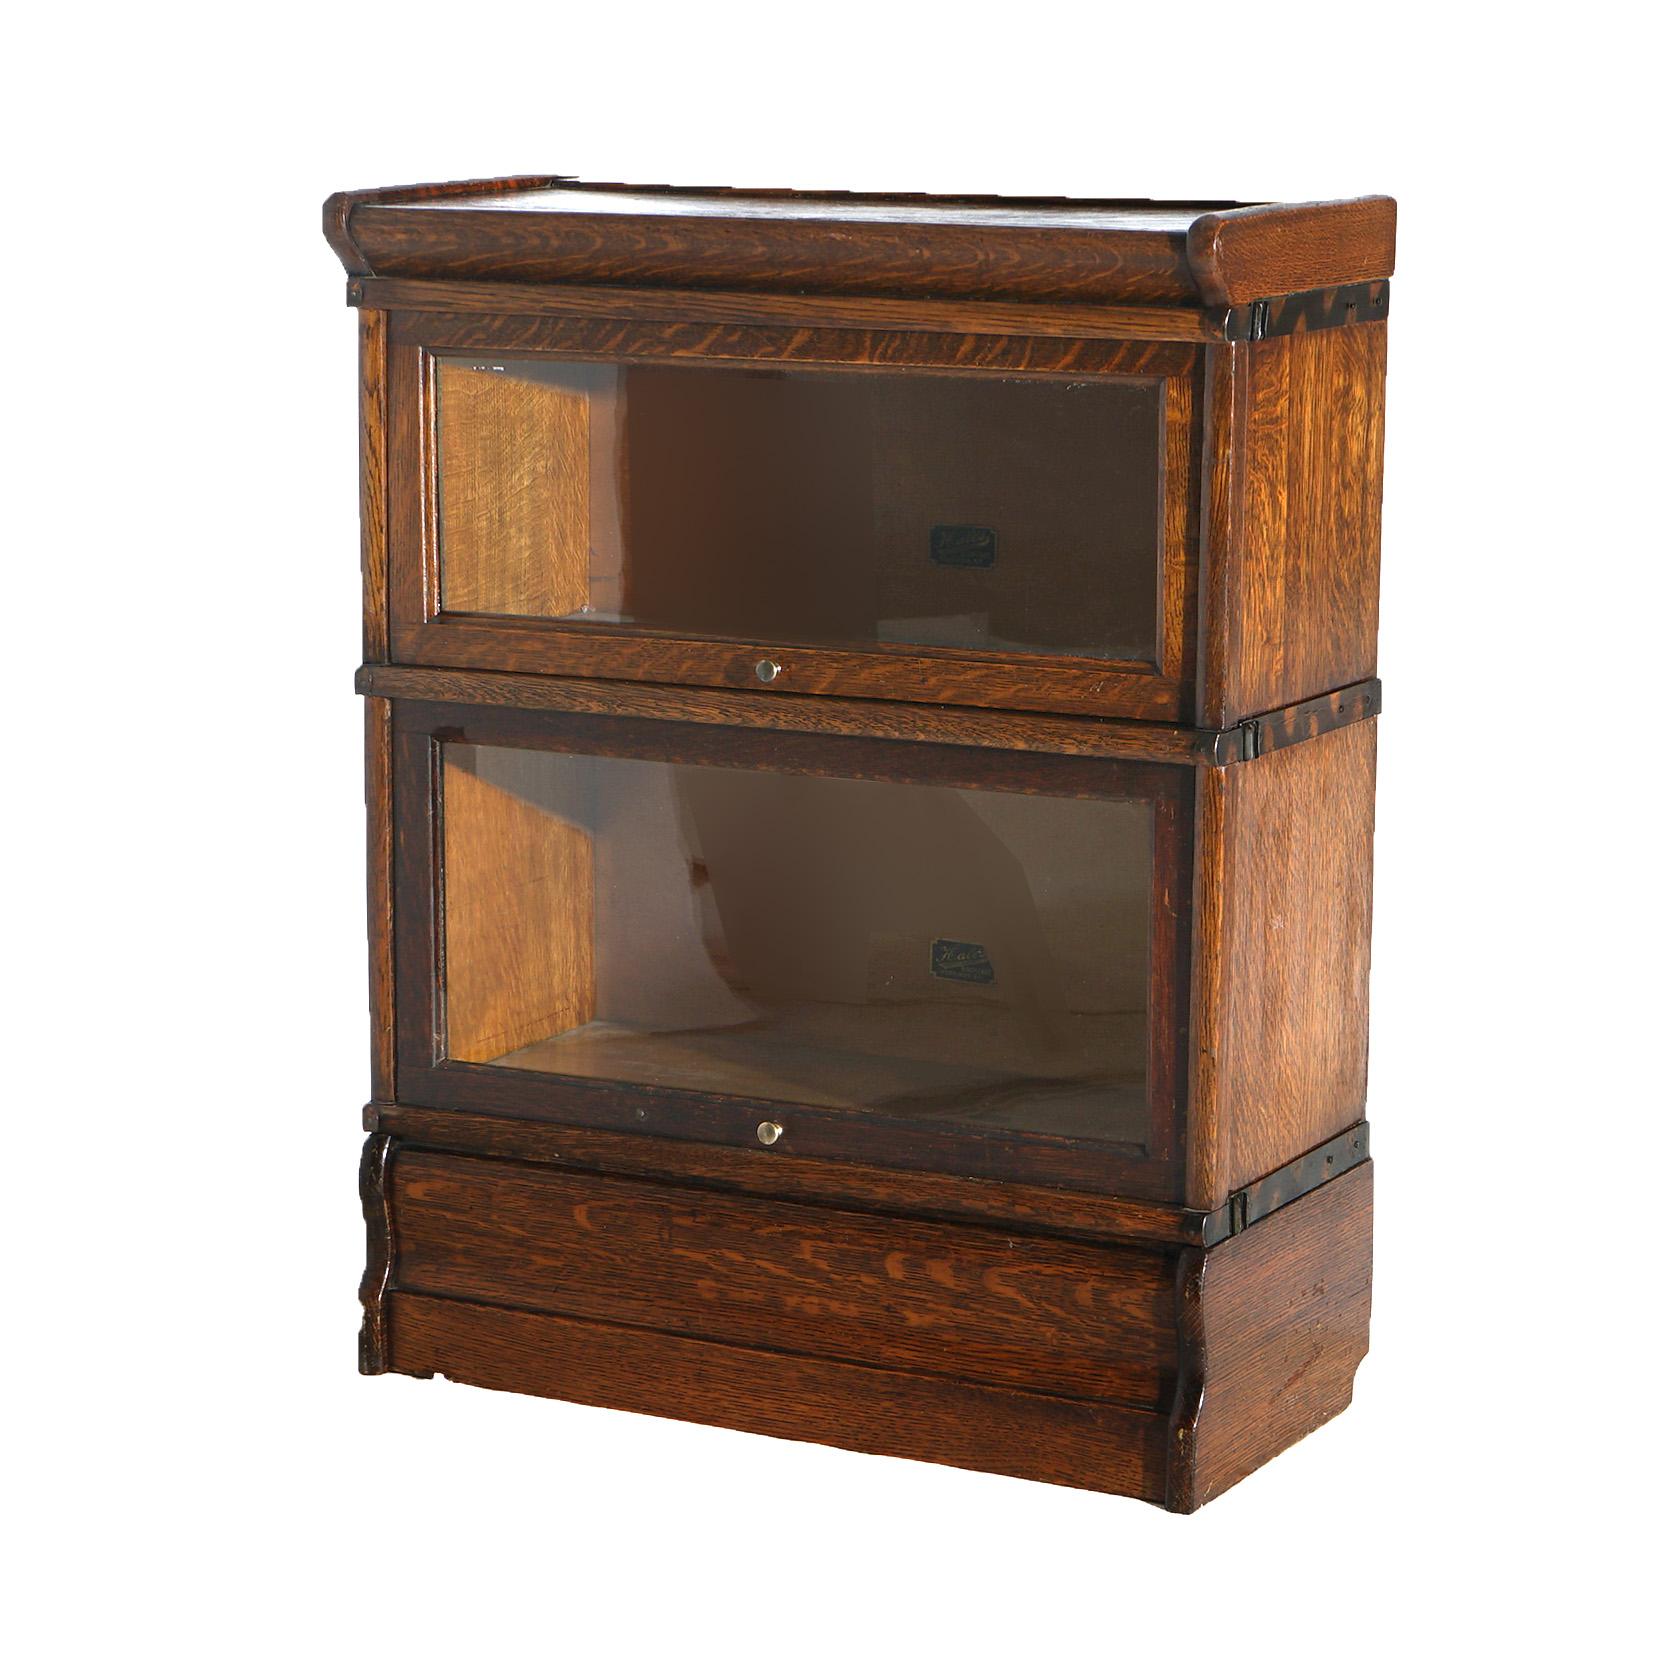 An antique Arts and Crafts barrister bookcase by Hale's offers quarter sawn oak construction with two stacks, each having pull out glass doors, raised on an ogee base and maker labels as photographed, c1920

Measures - 33